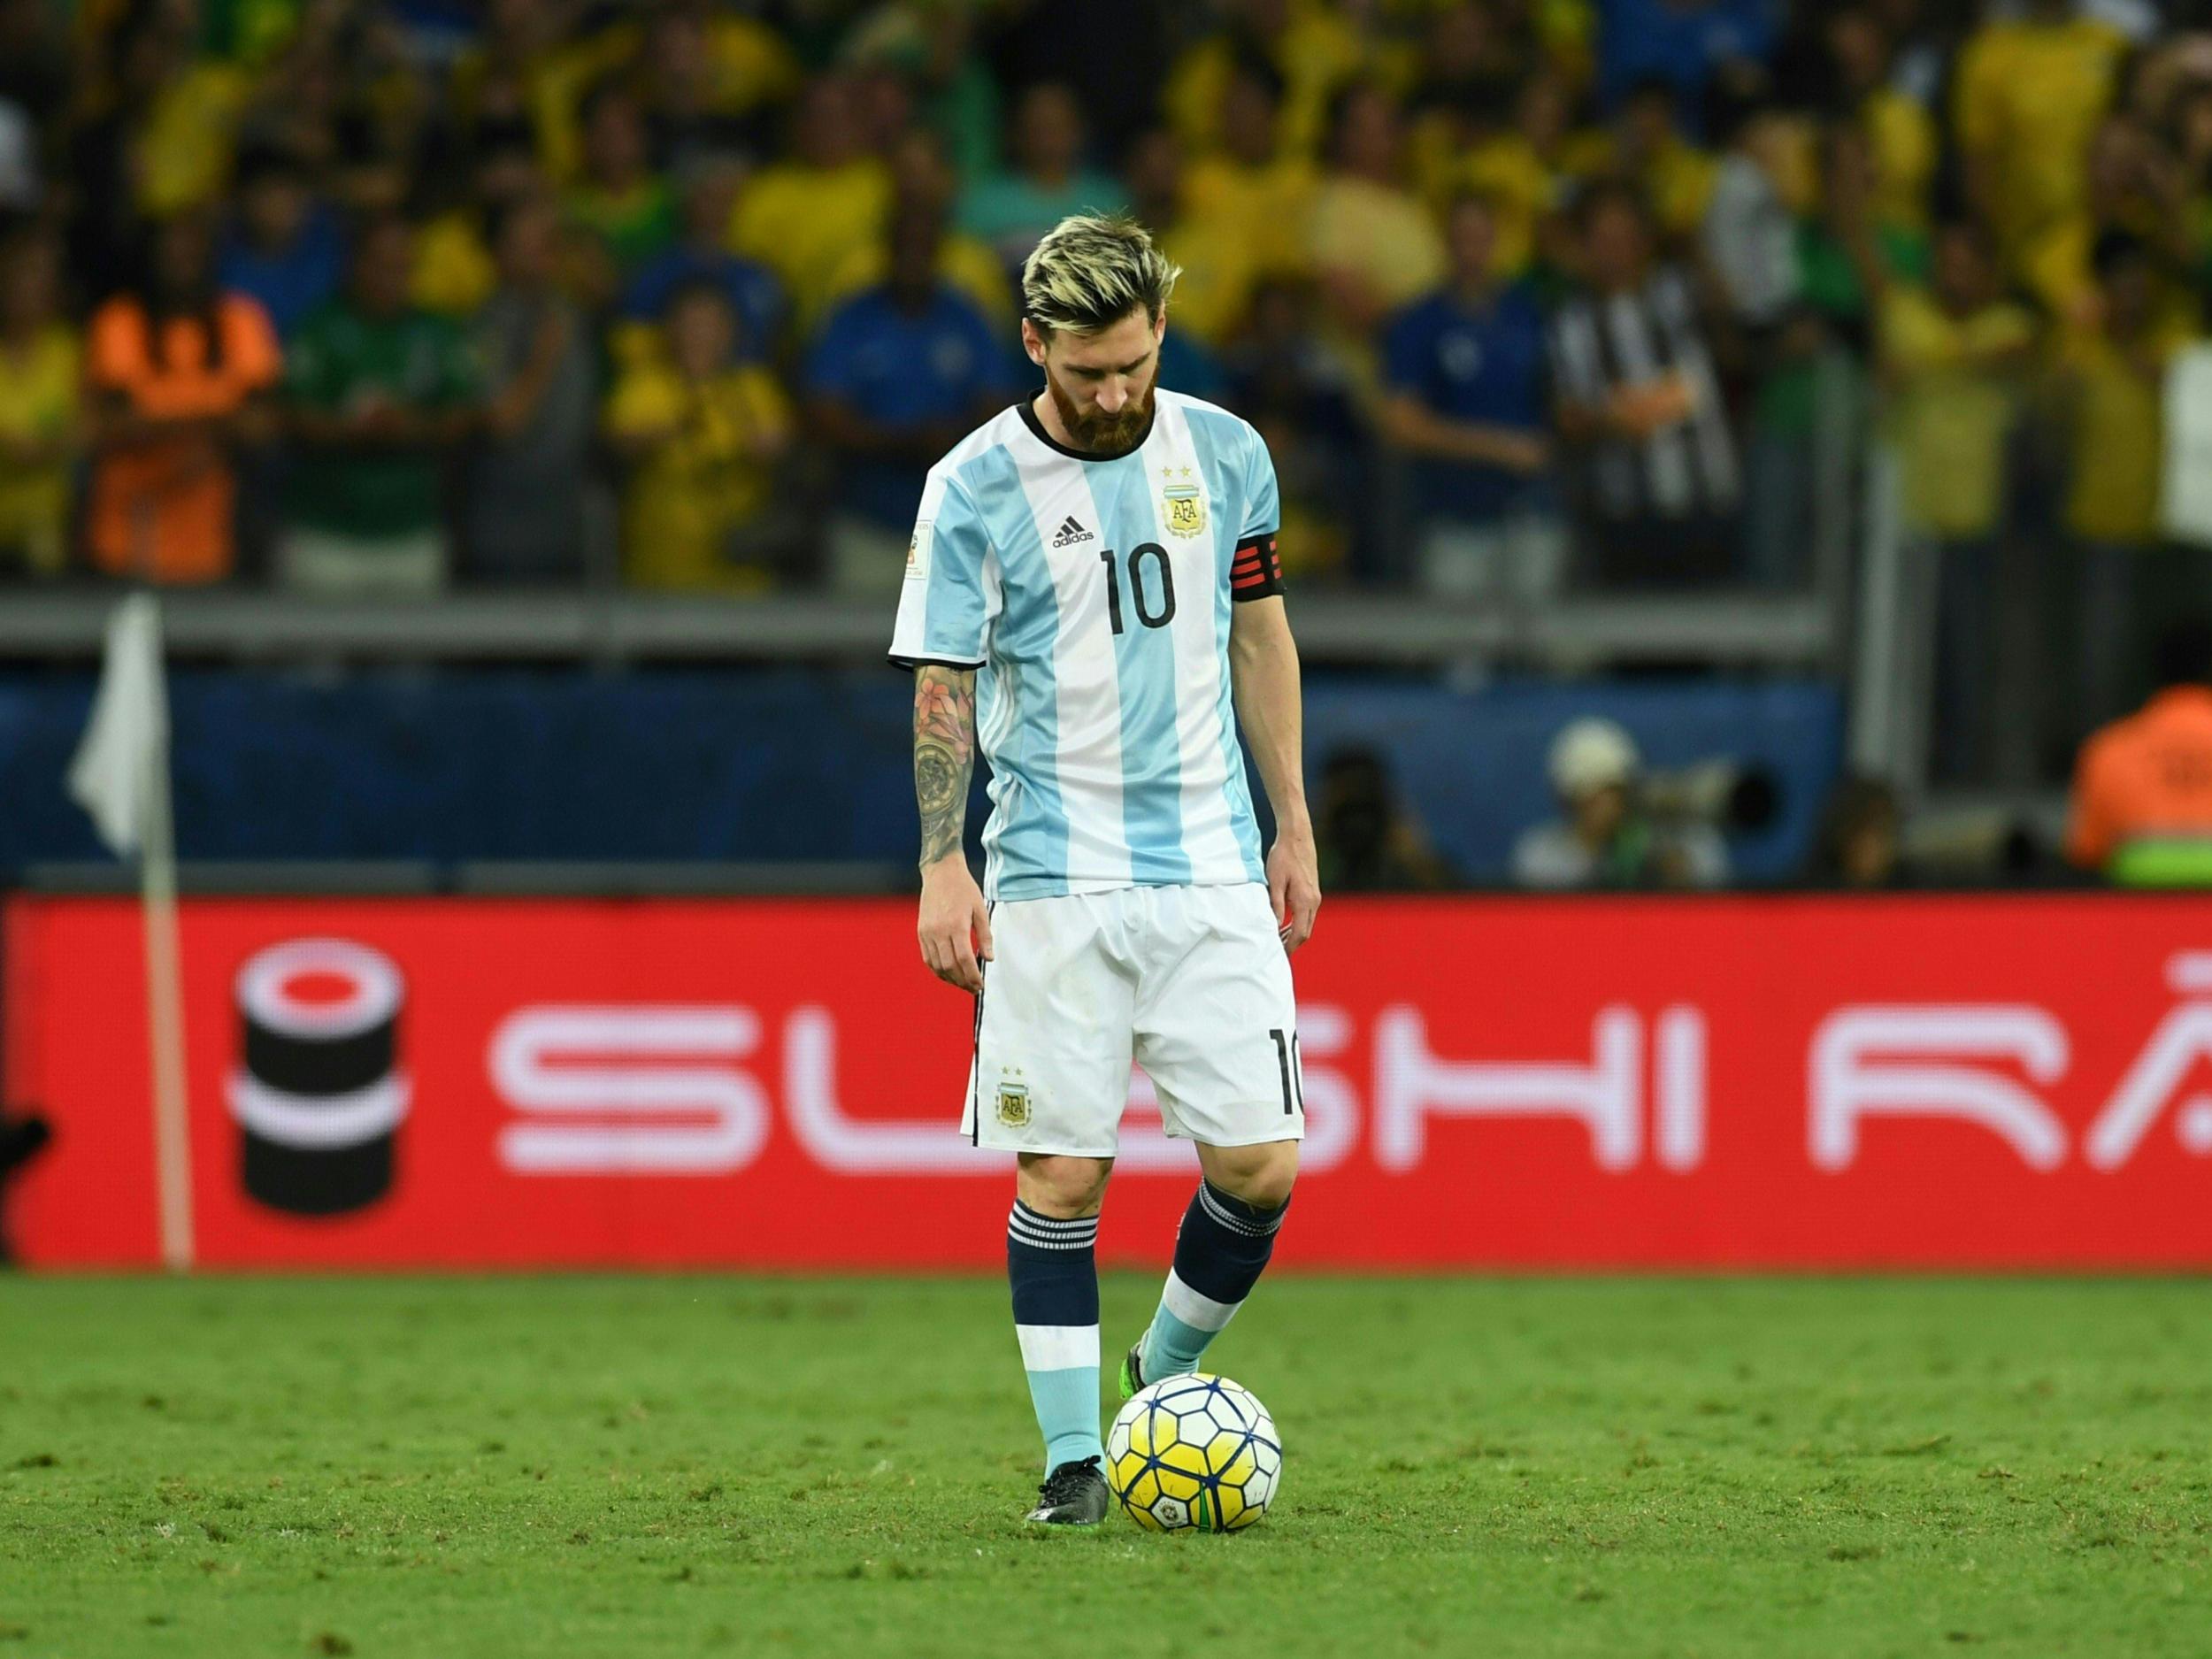 Messi has been compared to a hated war criminal in his home country